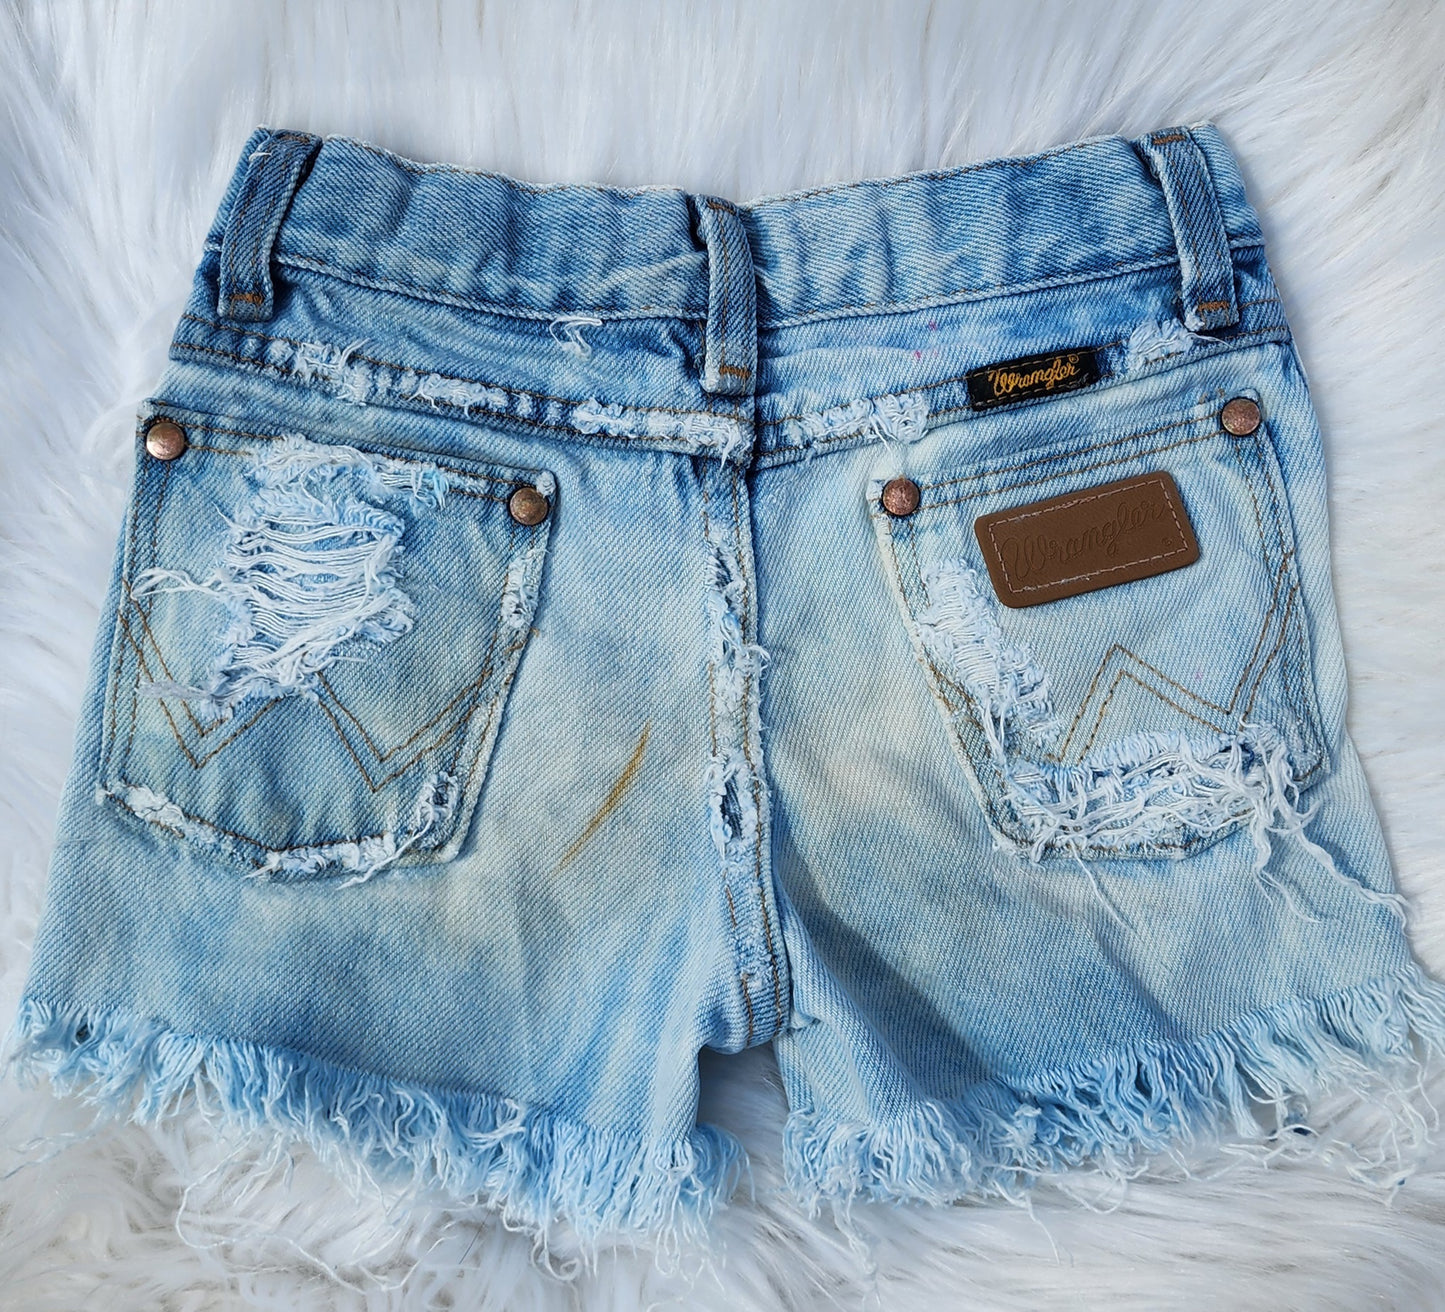 Distressed bleached wranglers